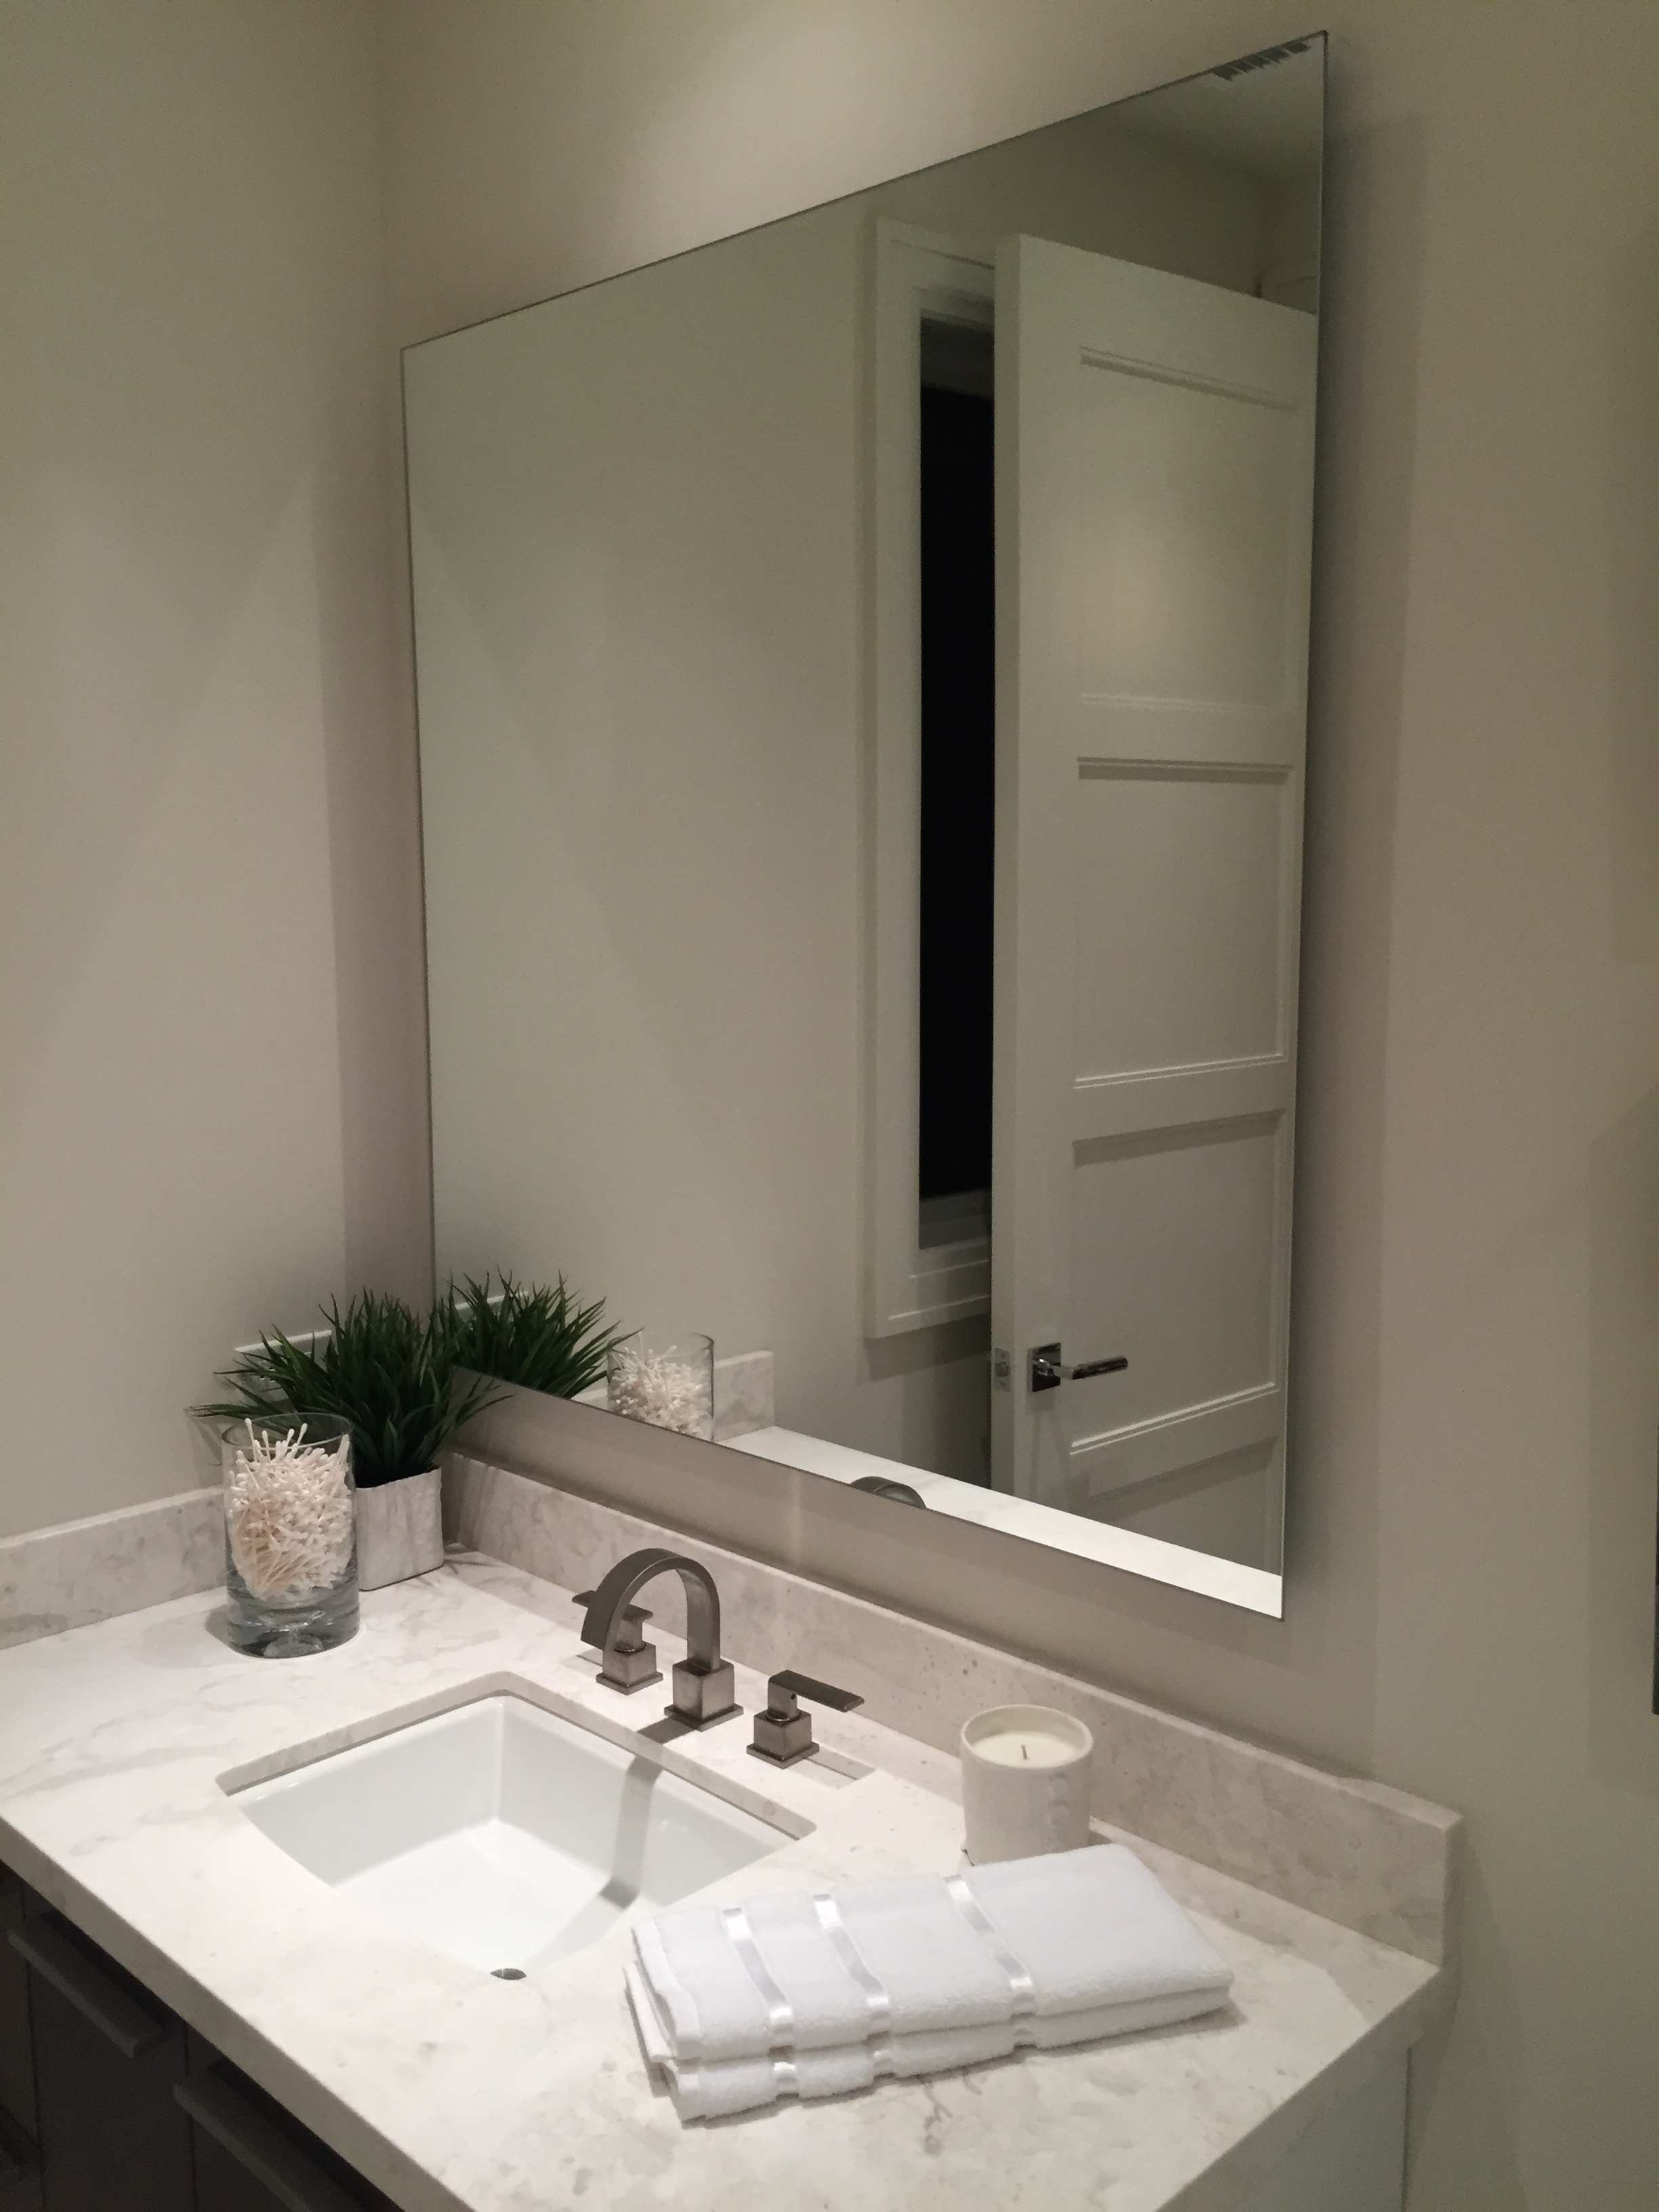 Floating Mirror The Glass Pe A, Diy Floating Vanity Mirror Mount